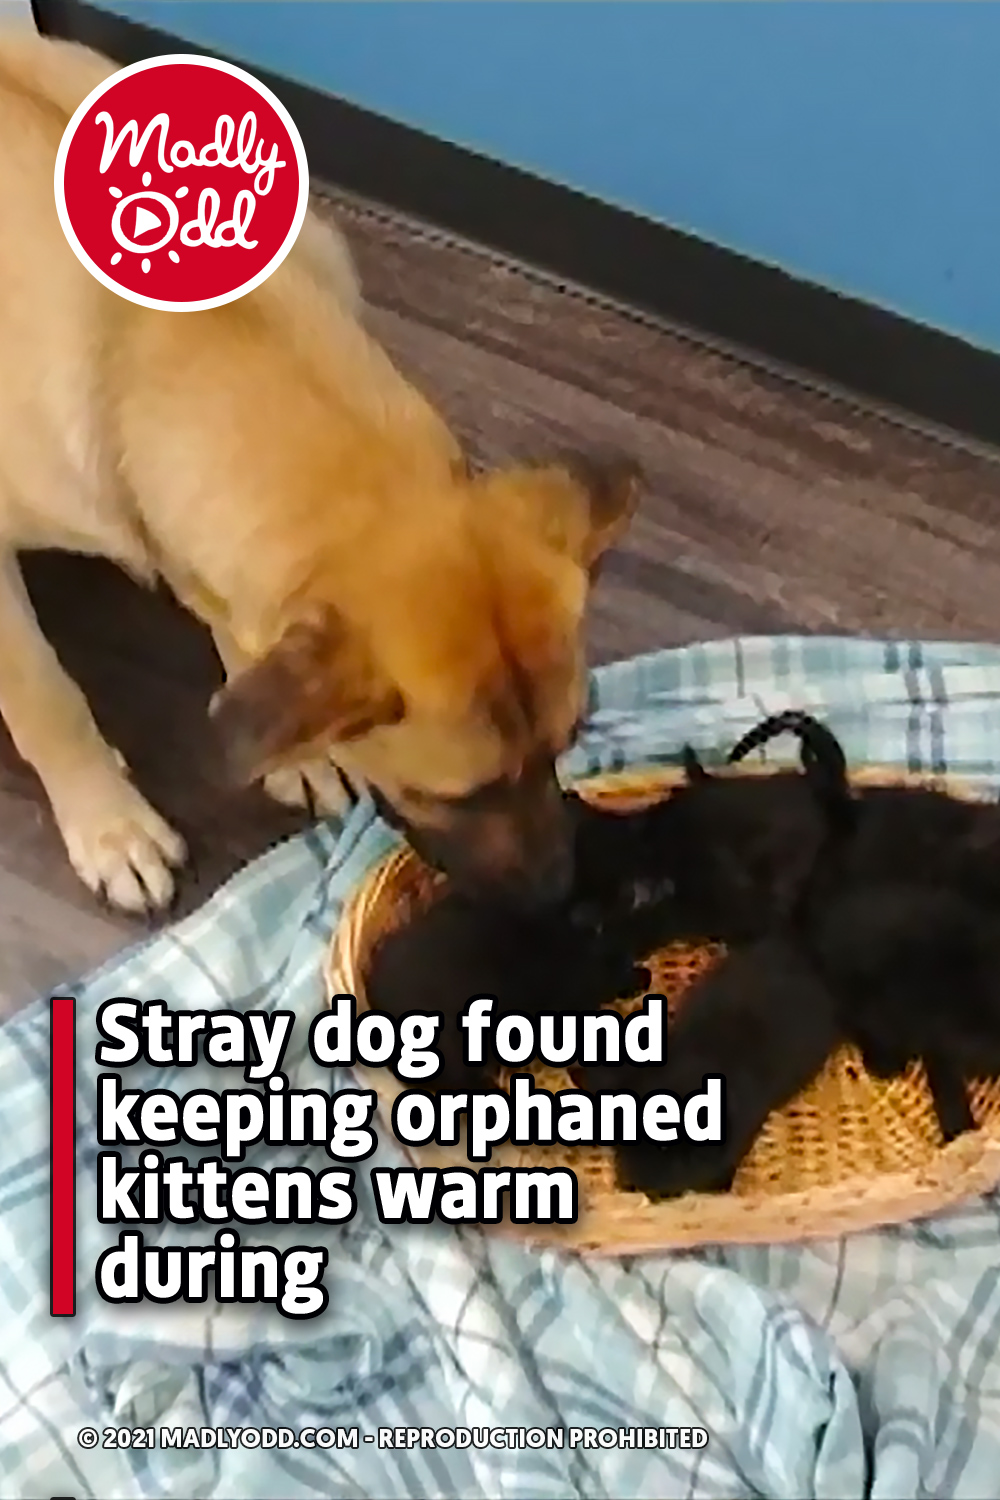 Stray dog found keeping orphaned kittens warm during